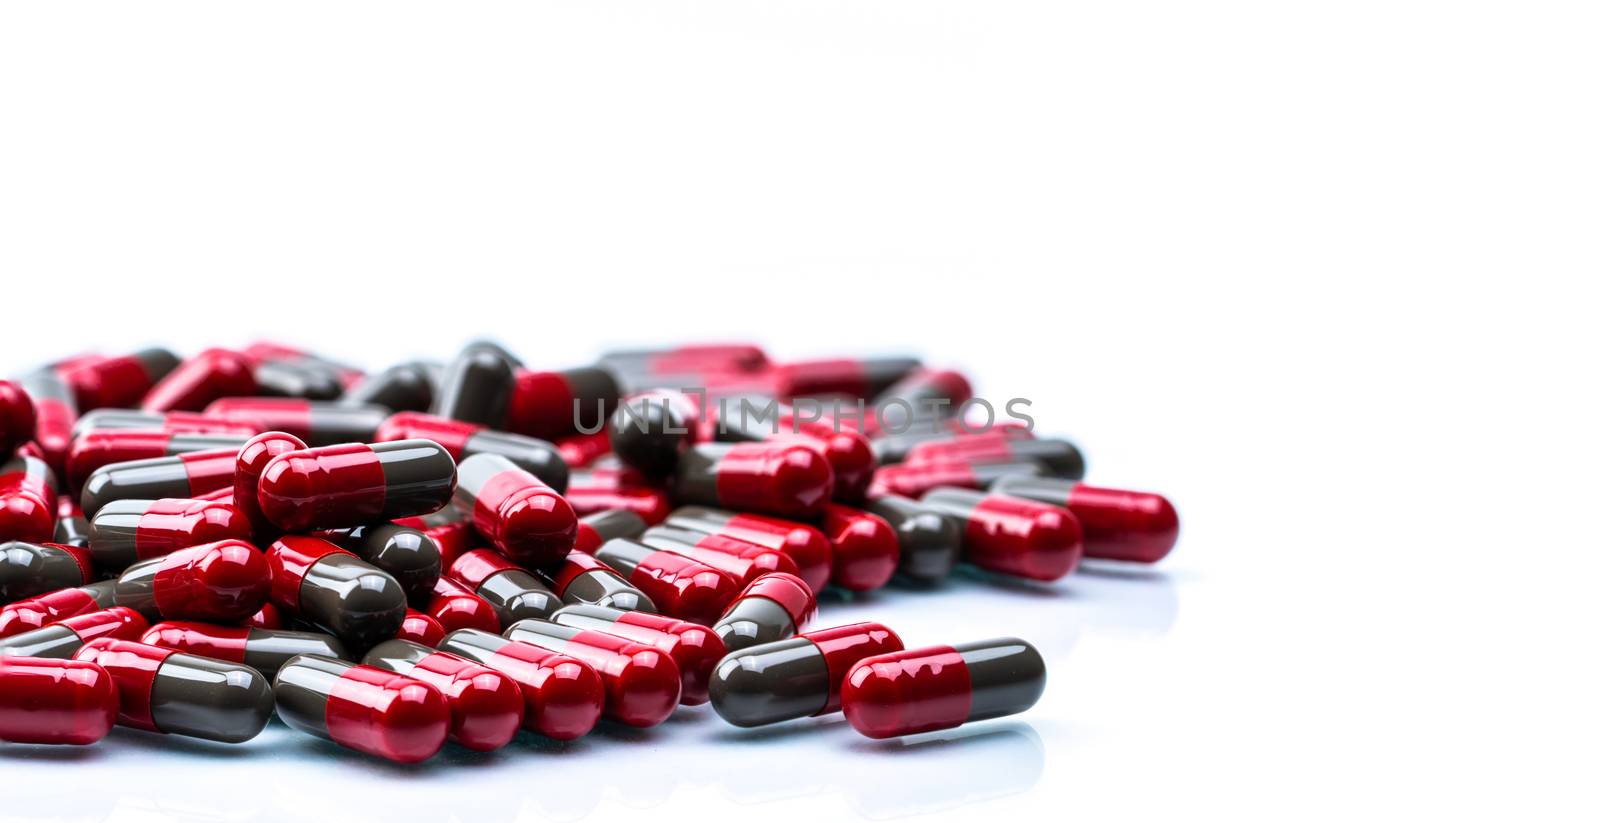 Pile of red and grey capsule pills isolated on white background with copy space. Flunarizine : drug for migraine prophylaxis treatment. Global healthcare concept. Pharmaceutical industry